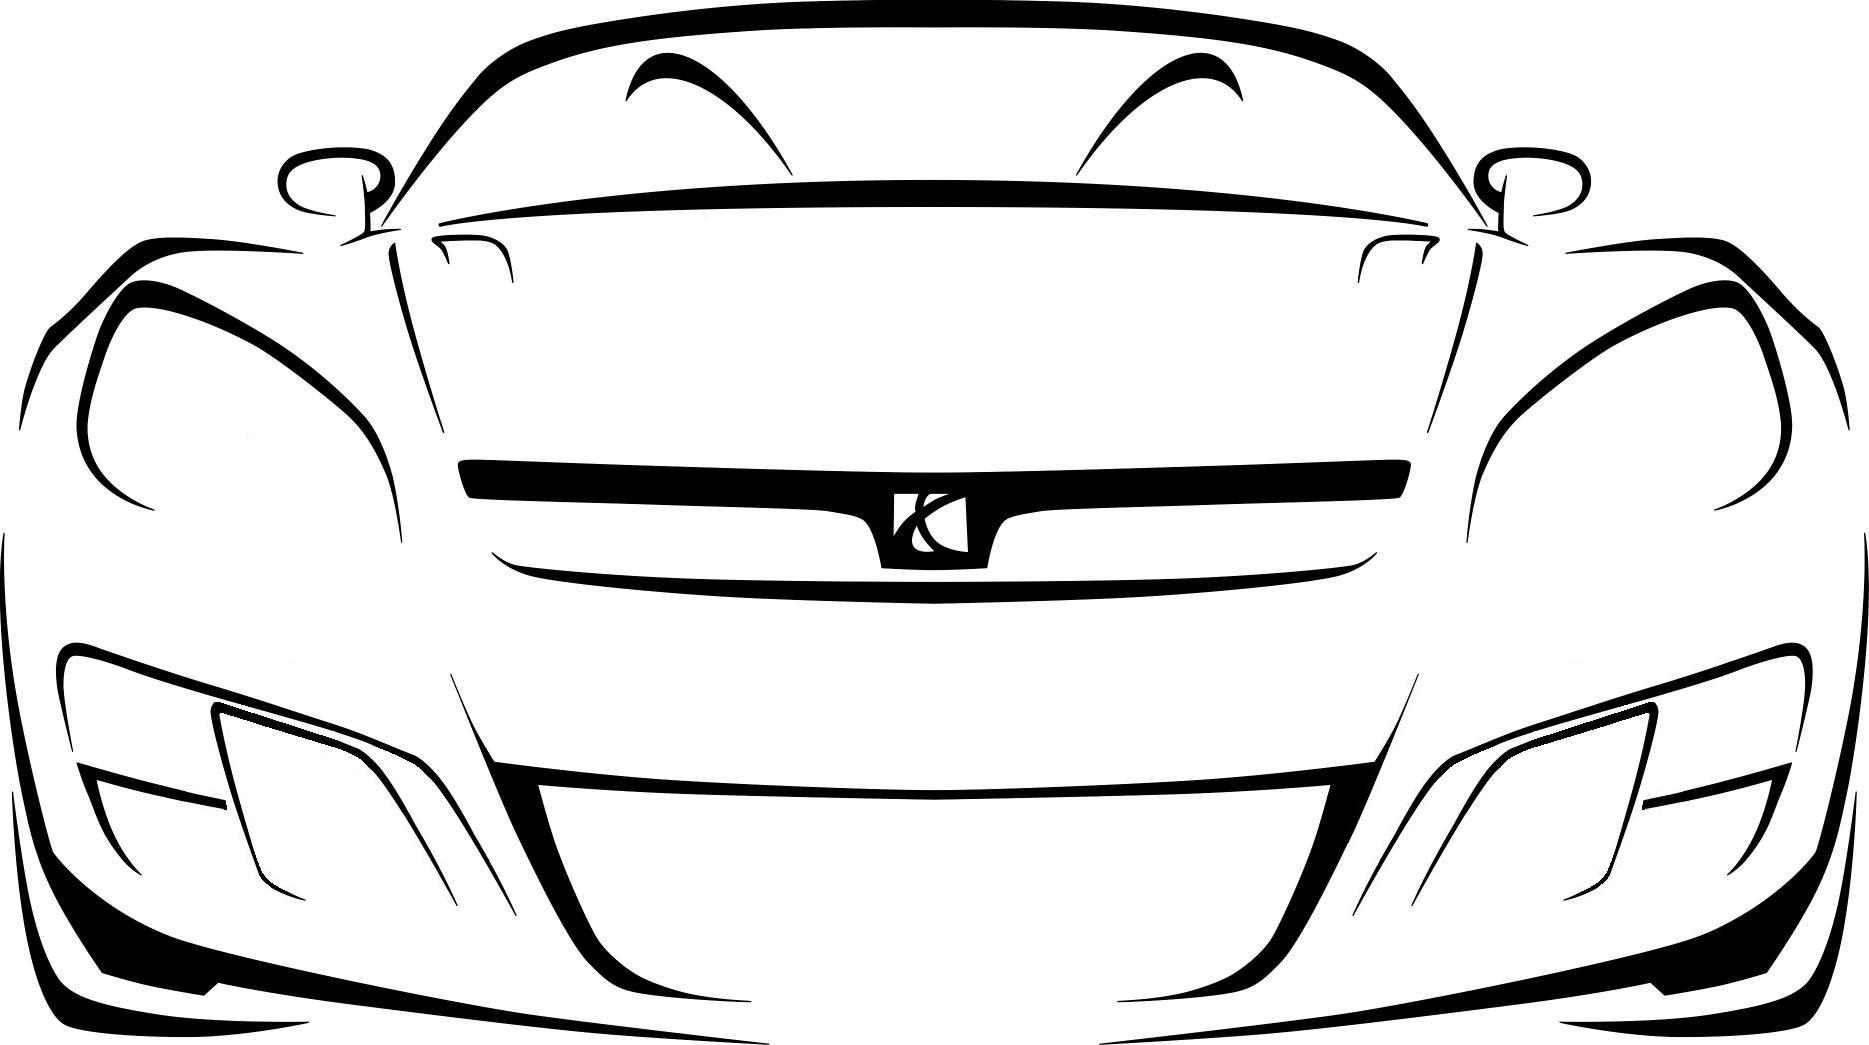 Car Outline - Clipart library